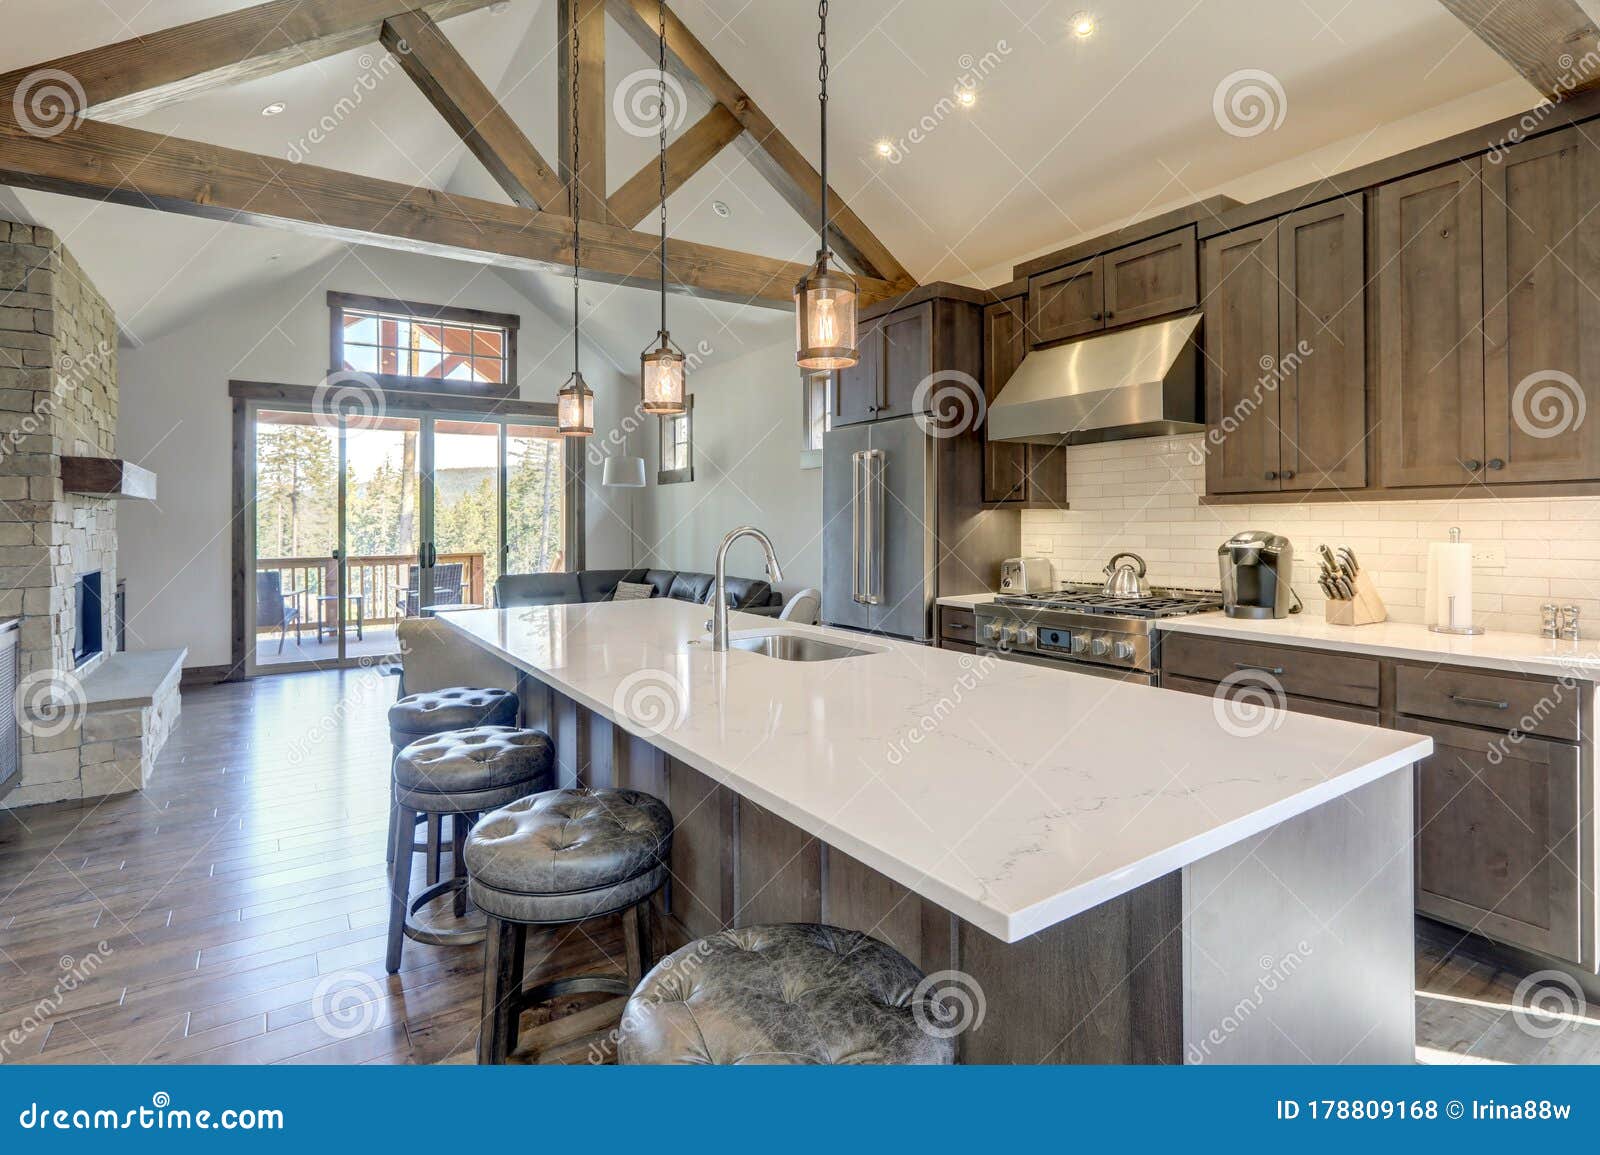 18 Vaulted Ceiling Kitchen Photos   Free & Royalty Free Stock ...